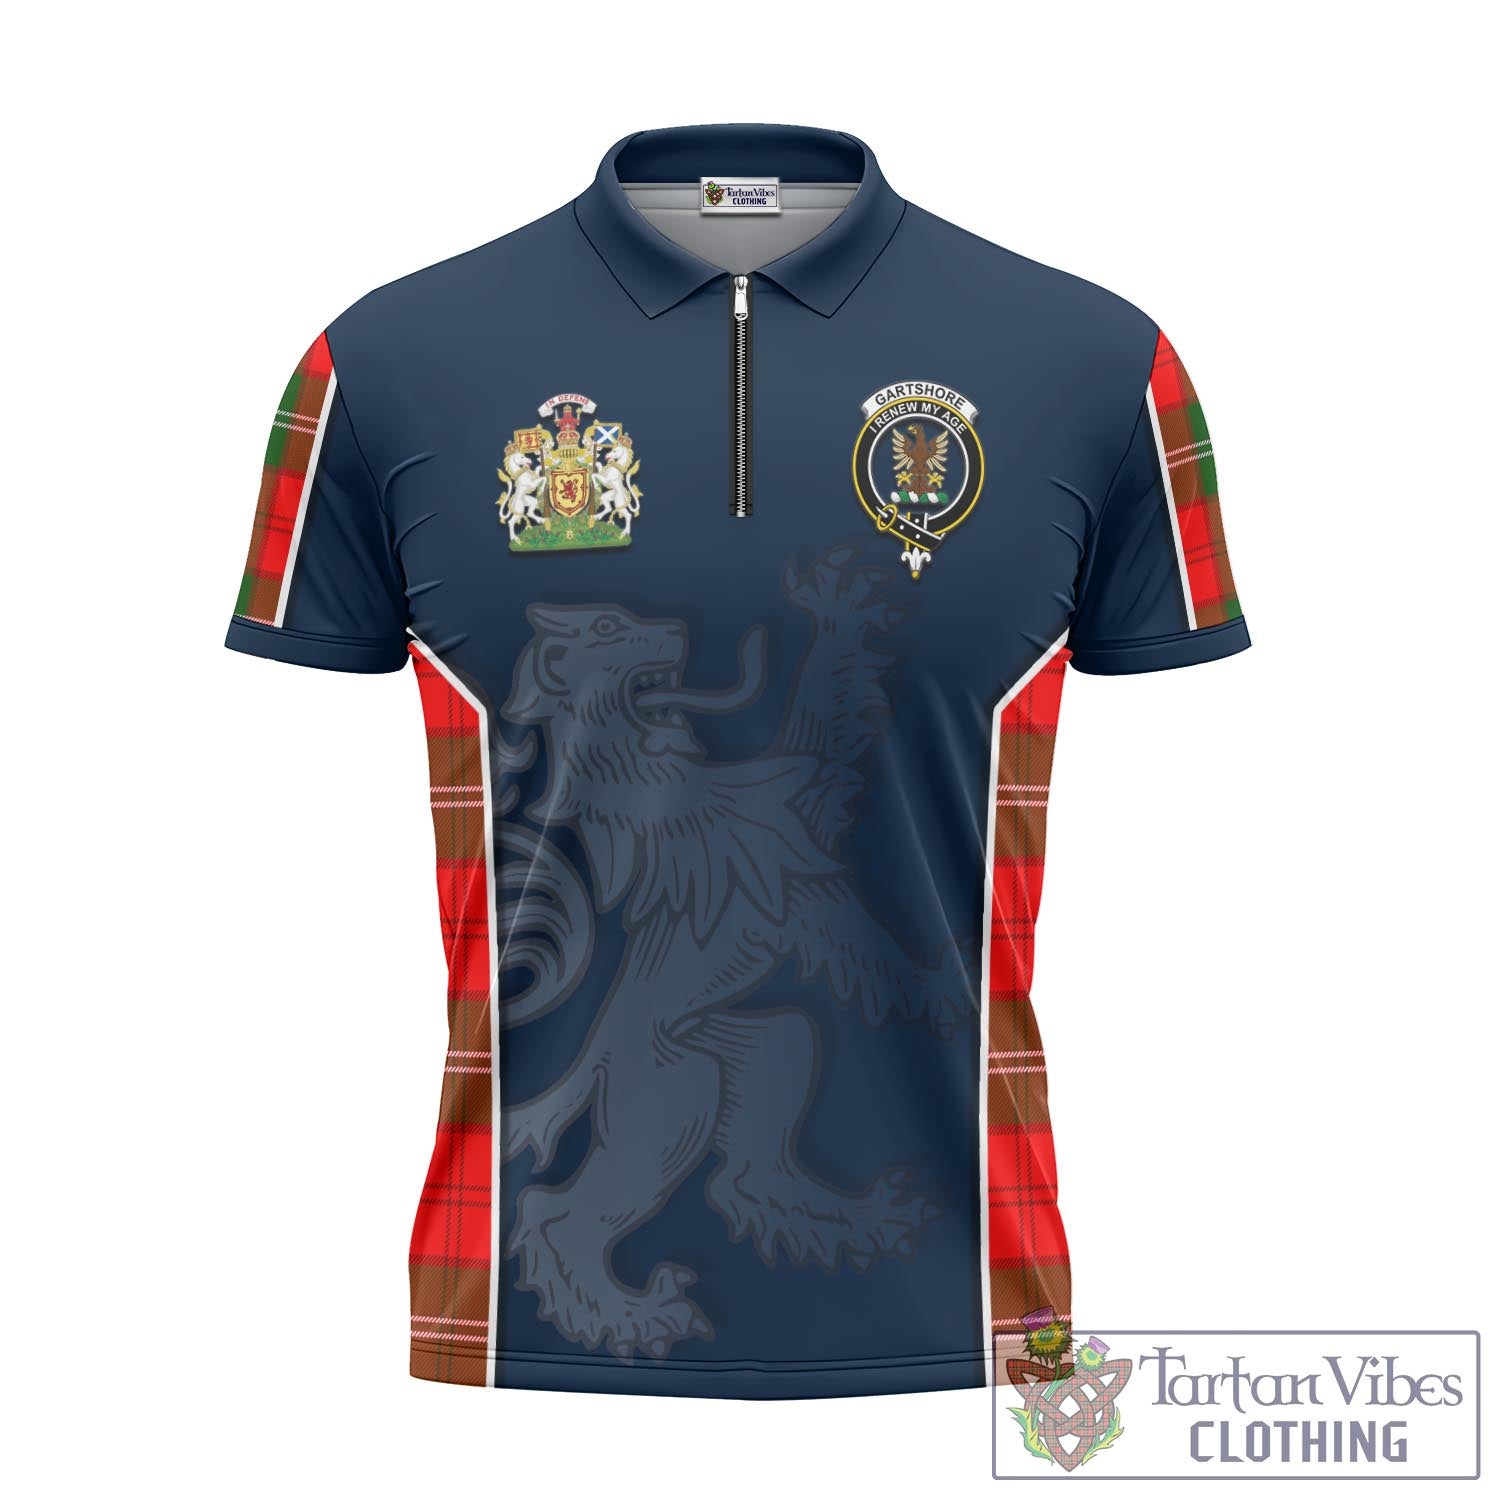 Tartan Vibes Clothing Gartshore Tartan Zipper Polo Shirt with Family Crest and Lion Rampant Vibes Sport Style